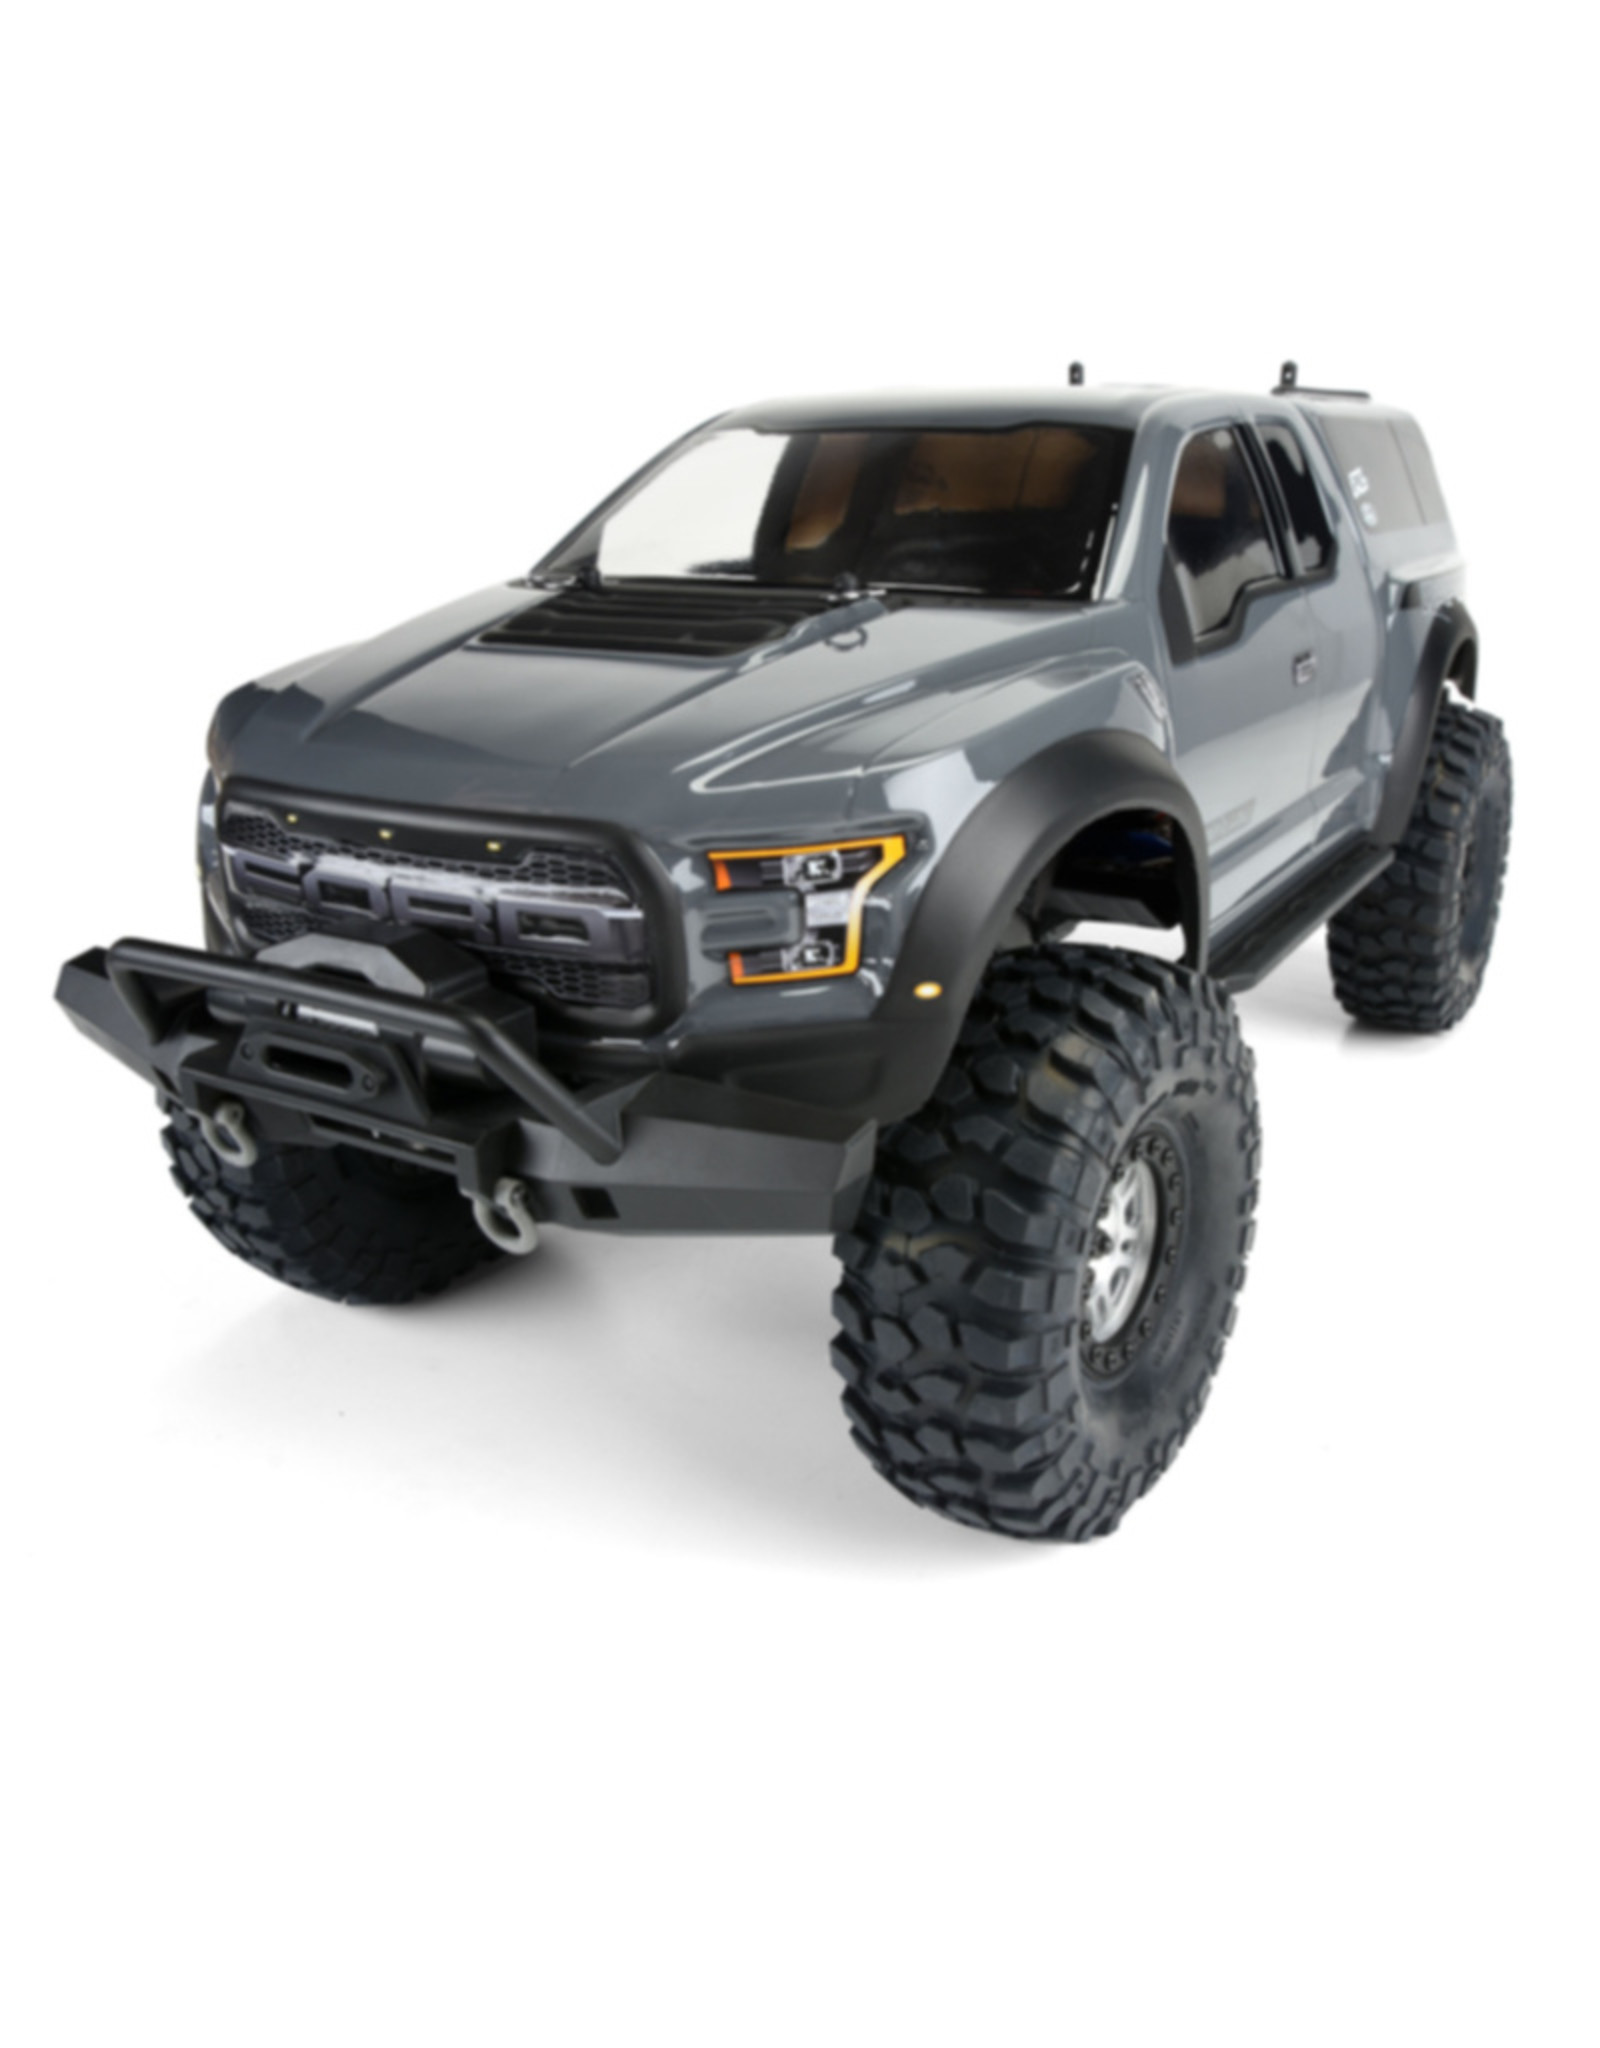 Pro-Line Racing PRO350900  2017 Ford F-150 Raptor Clear Bdy :12.8 WB TRX-4